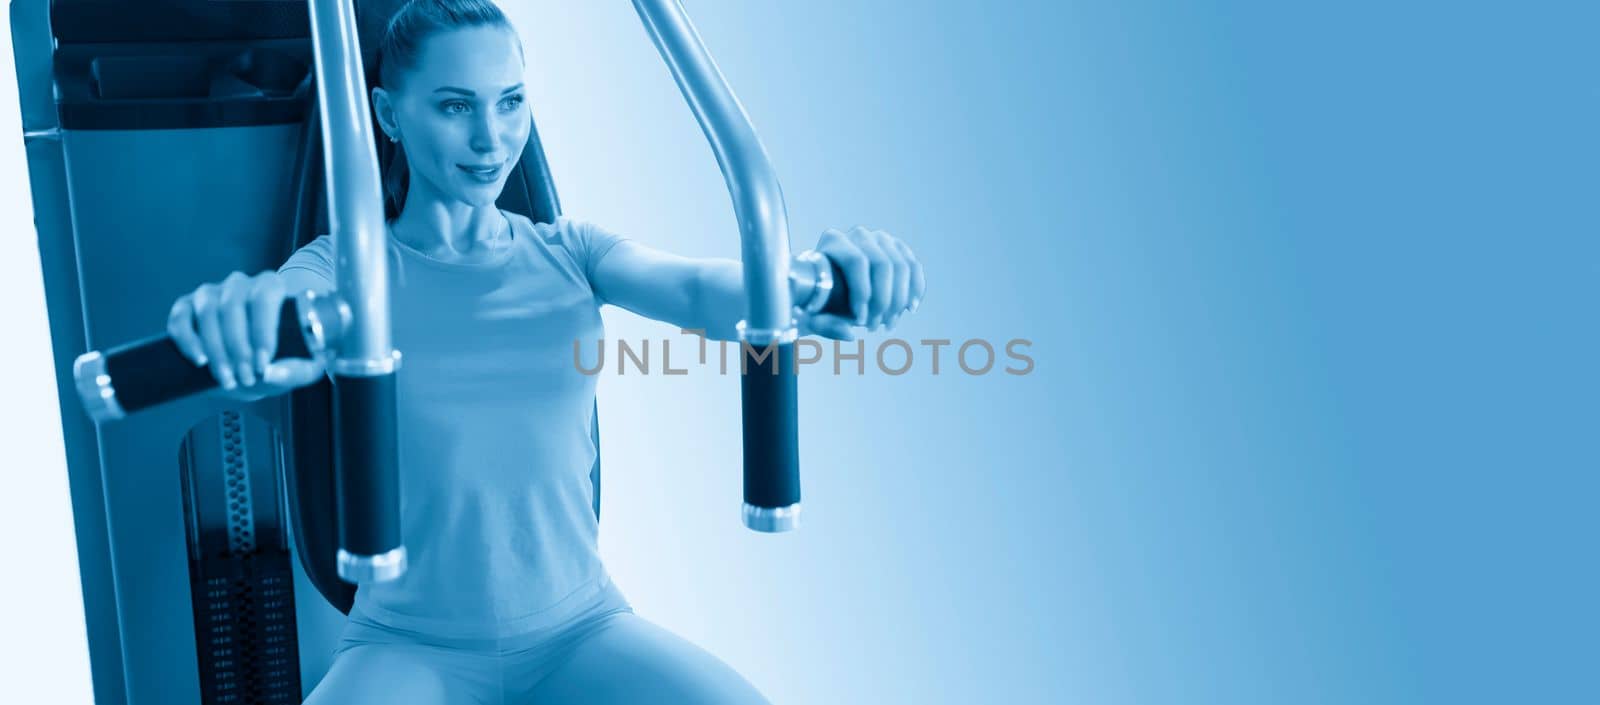 Torso portrait of Cheerful young adult caucasian woman working out on exercise machine